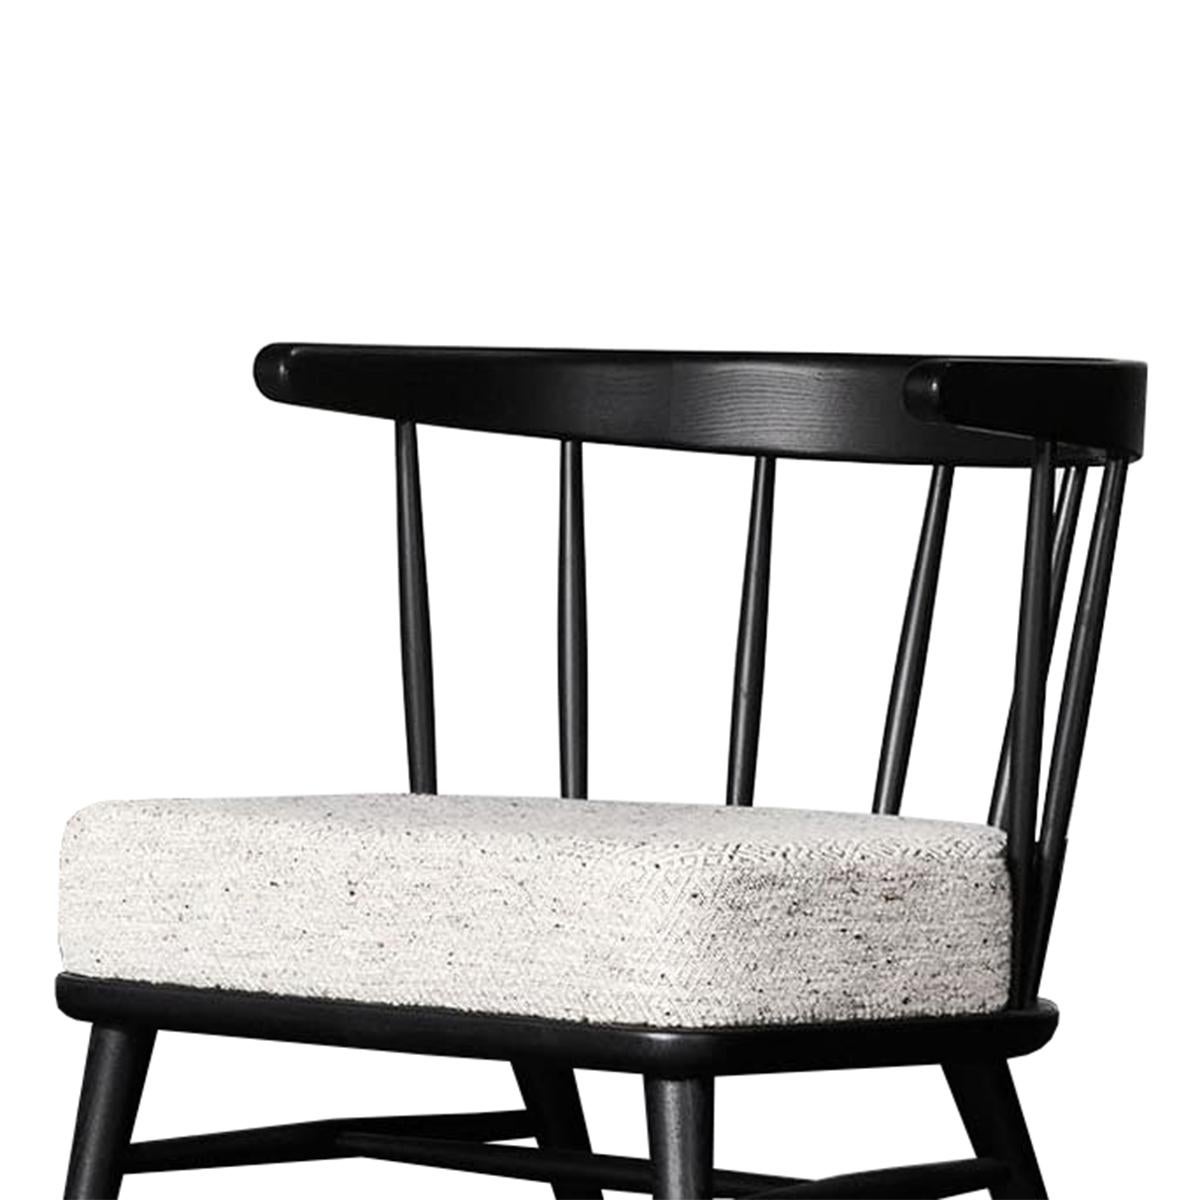 Chair Stanton all in solid ashwood in black finish
with 1 cushion seat, upholstered with foam and
covered with white and grey fabric.
Also available with other fabrics on request.
 